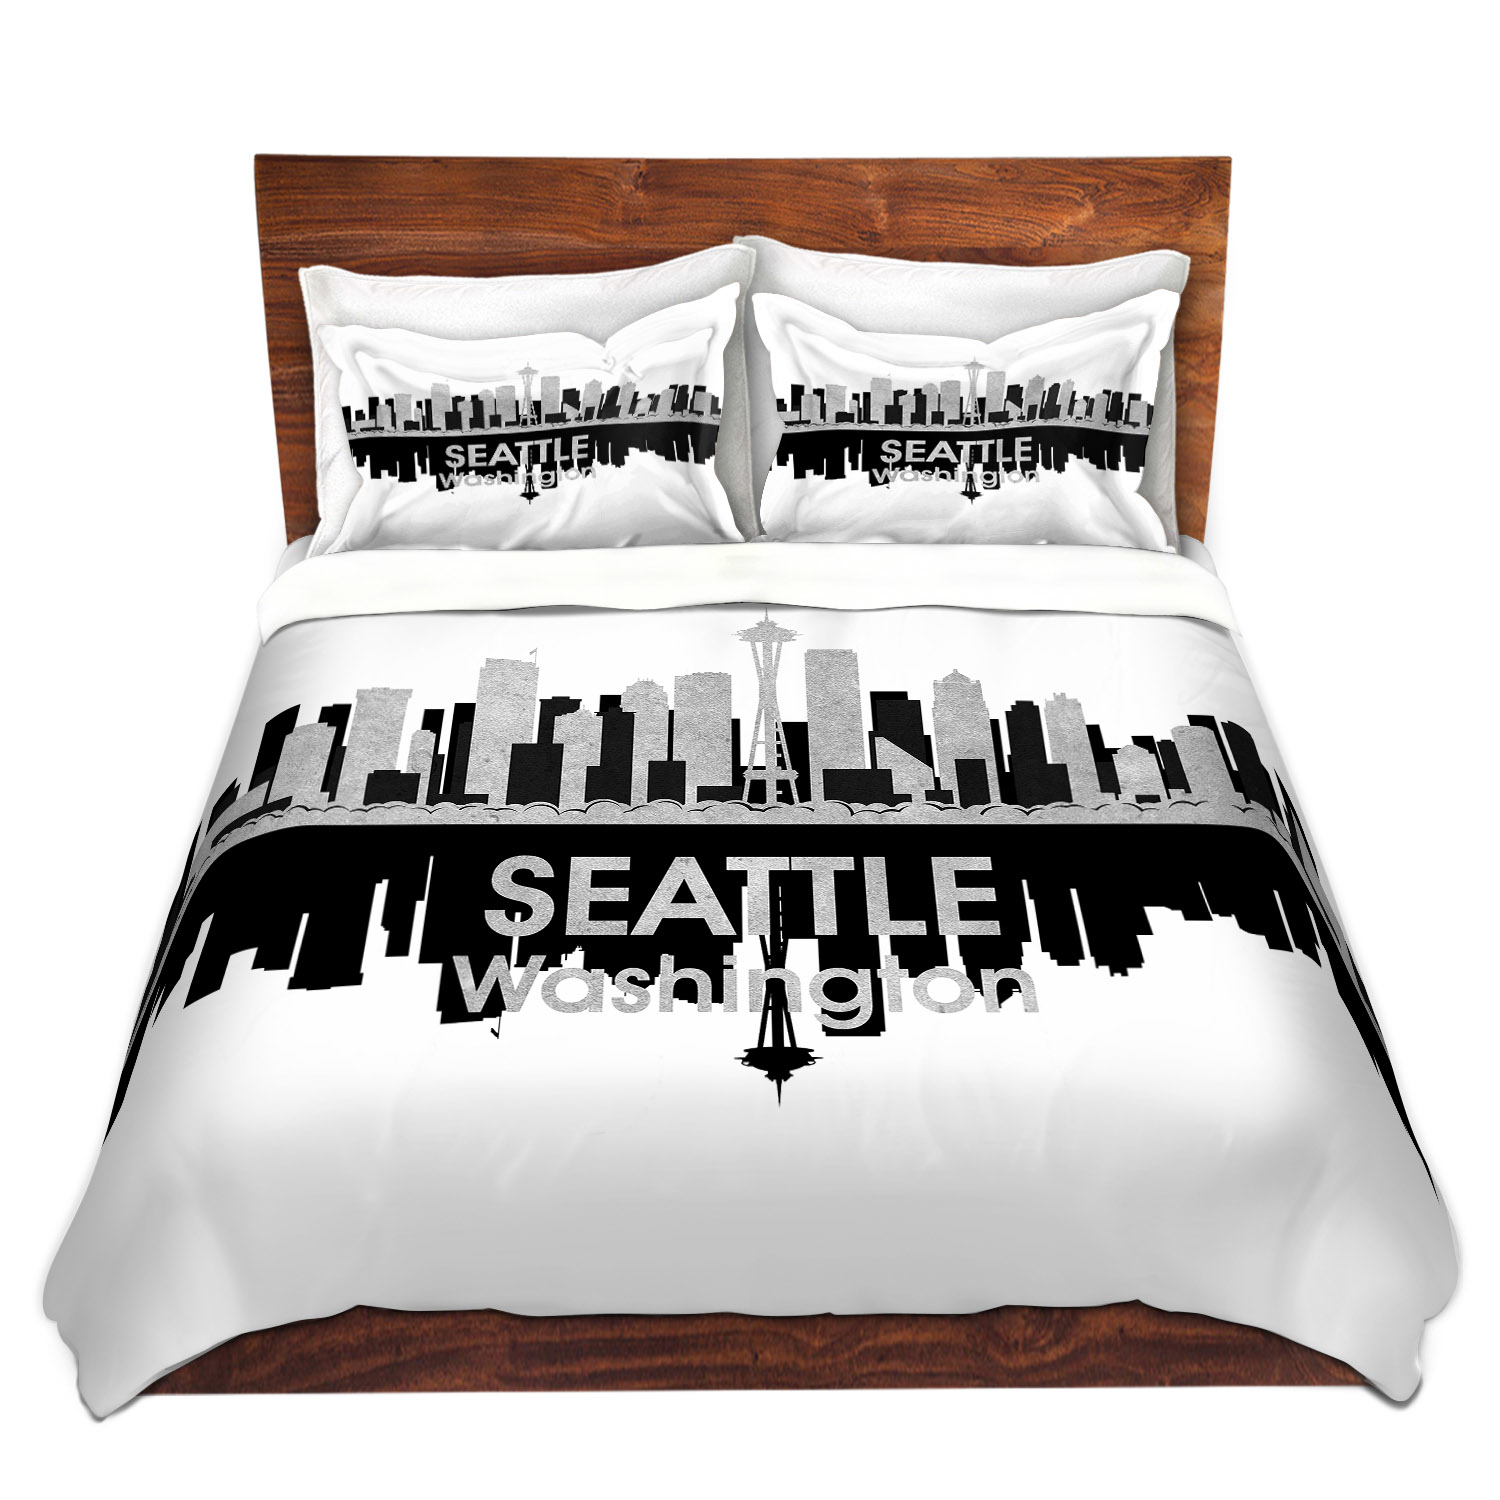 Dianoche Microfiber Duvet Covers By Angelina Vick - City Iv Seattle Washington